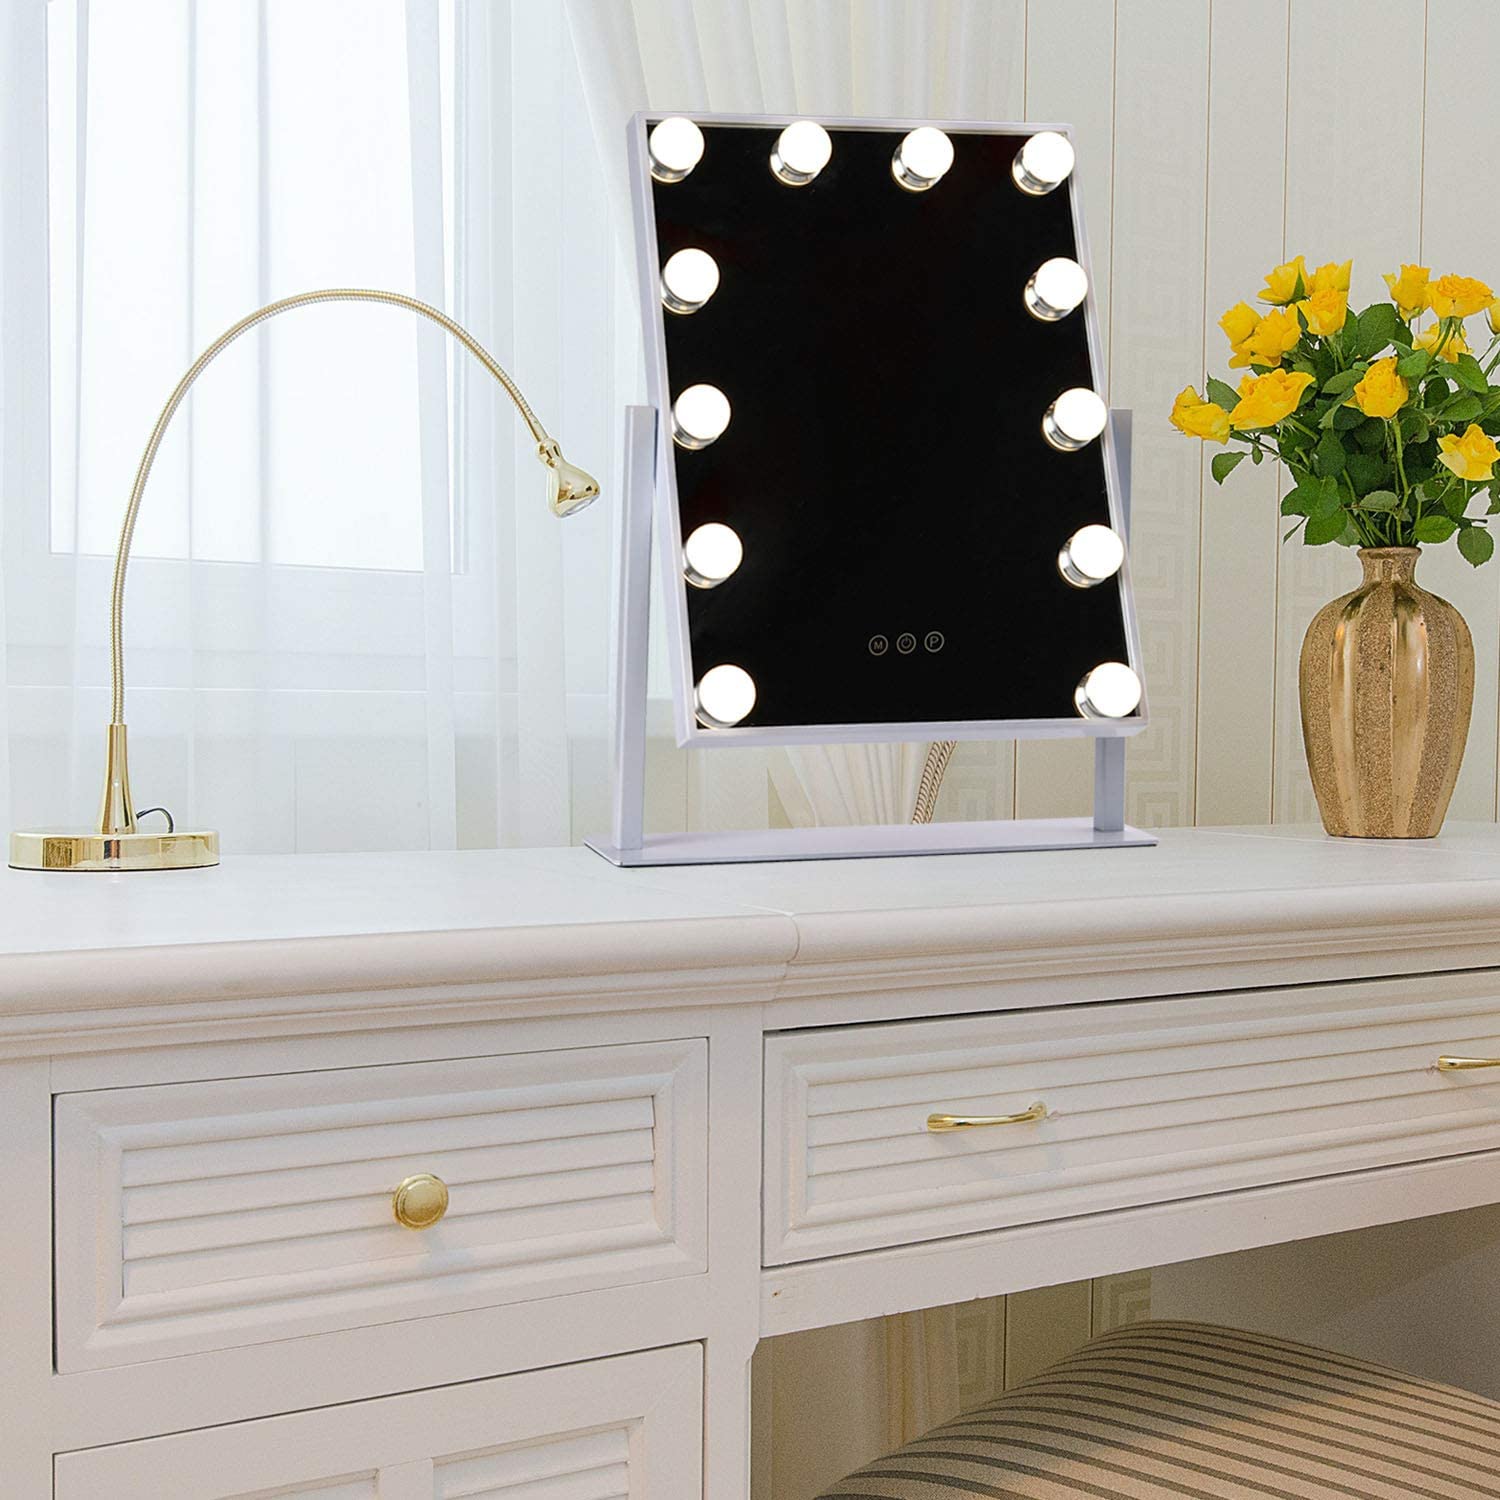 Hollywood Style Vanity Mirror with Embedded Lights, 360 Degree Rotary Cosmetic Mirror with 12 Dimmable LED Bulbs, 3 Touch Button and 3 Lighting Color Dressing Table Mirror for Makeup (White Frame)